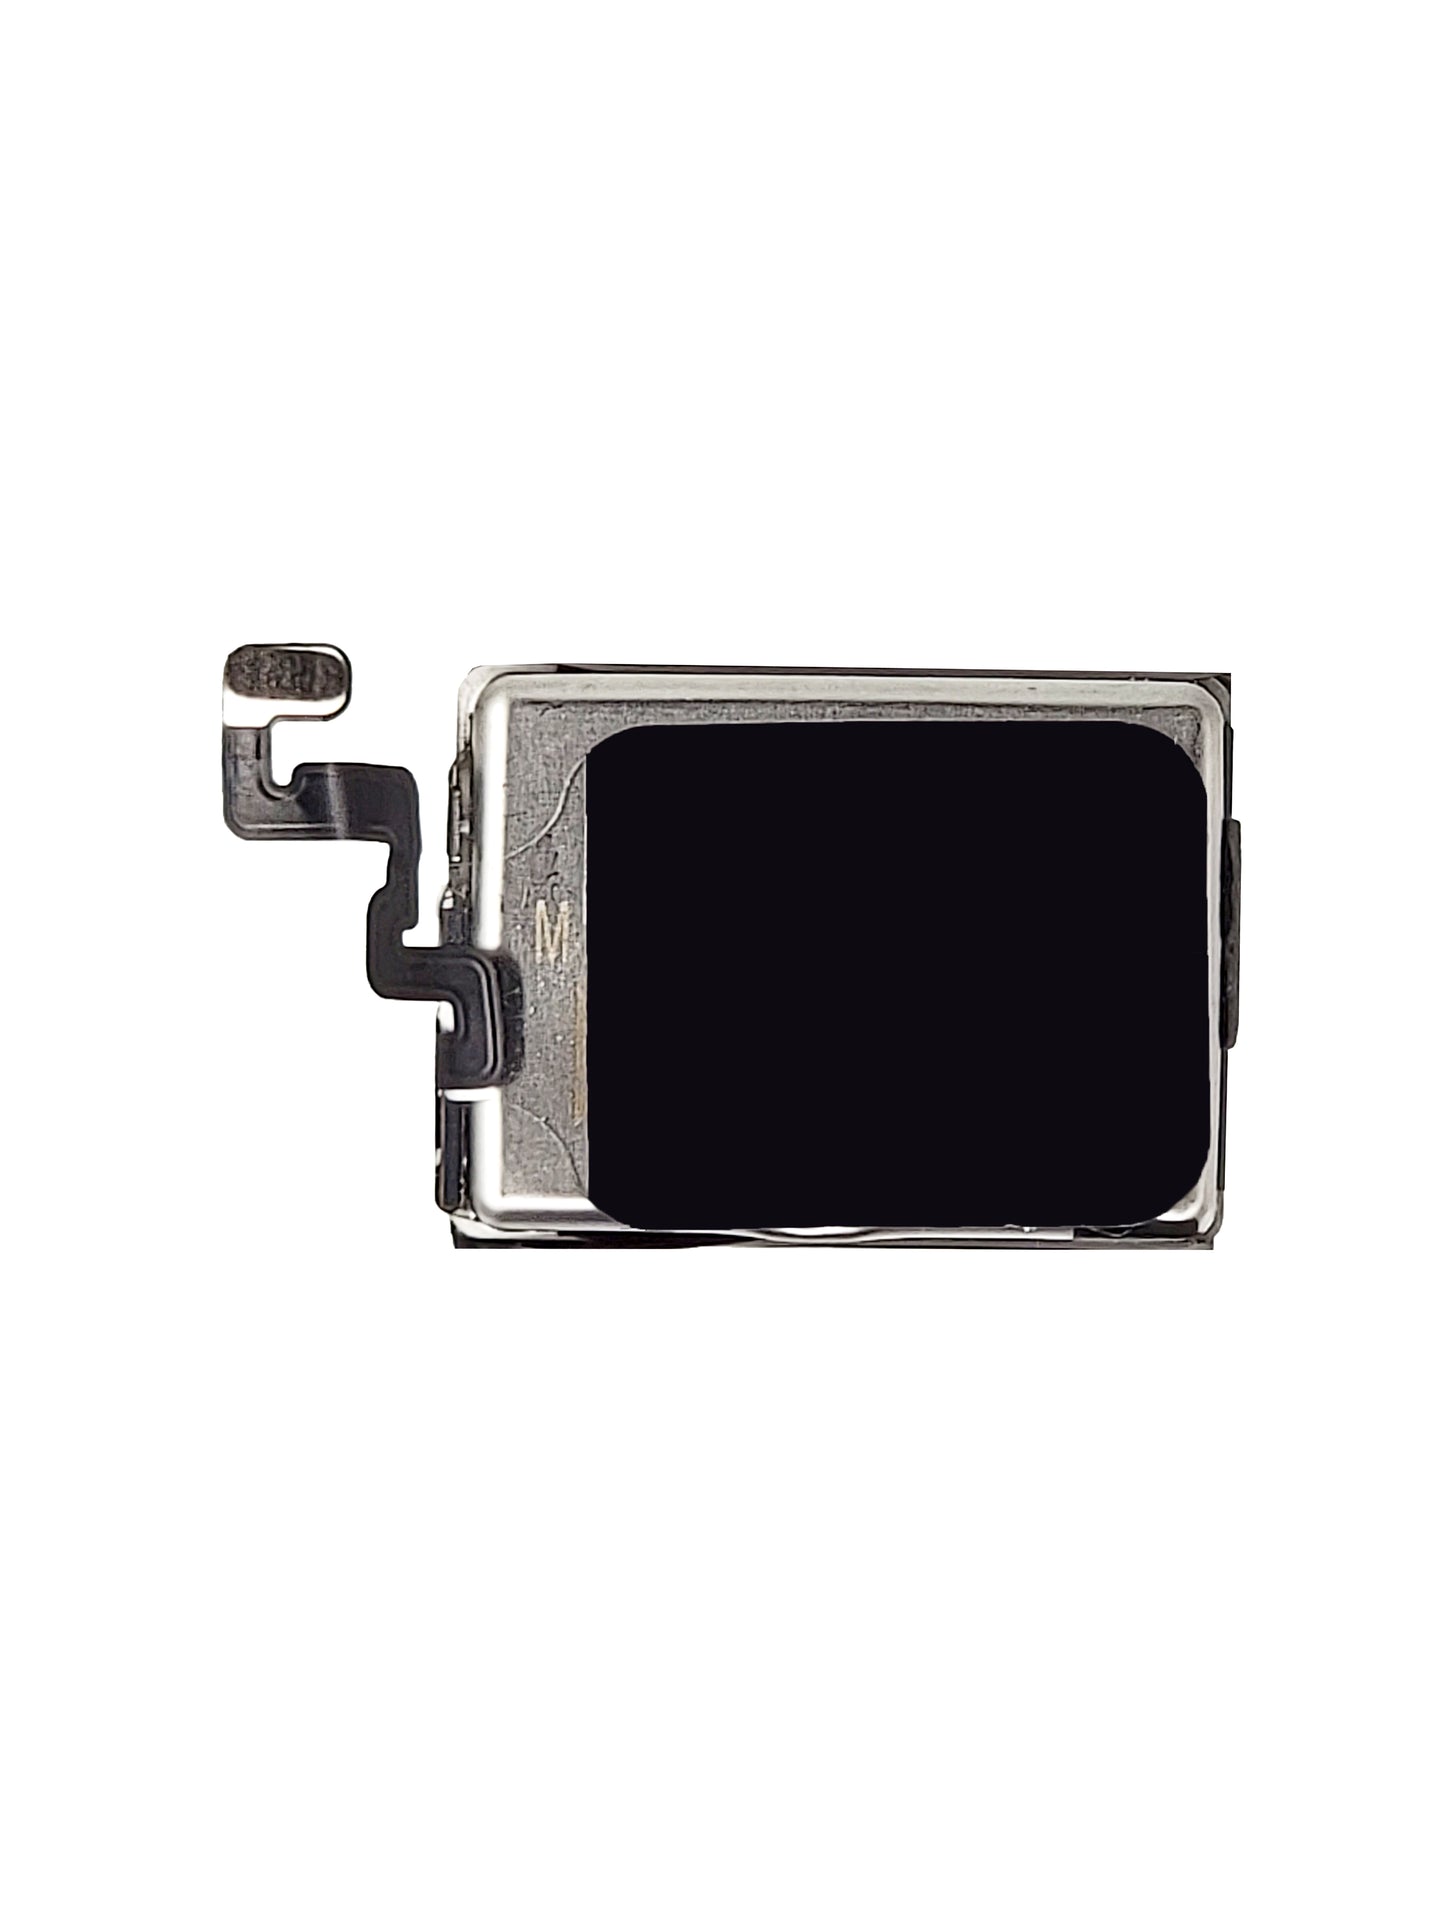 iWatch Series 6 (40mm) Battery (Zero Cycled)